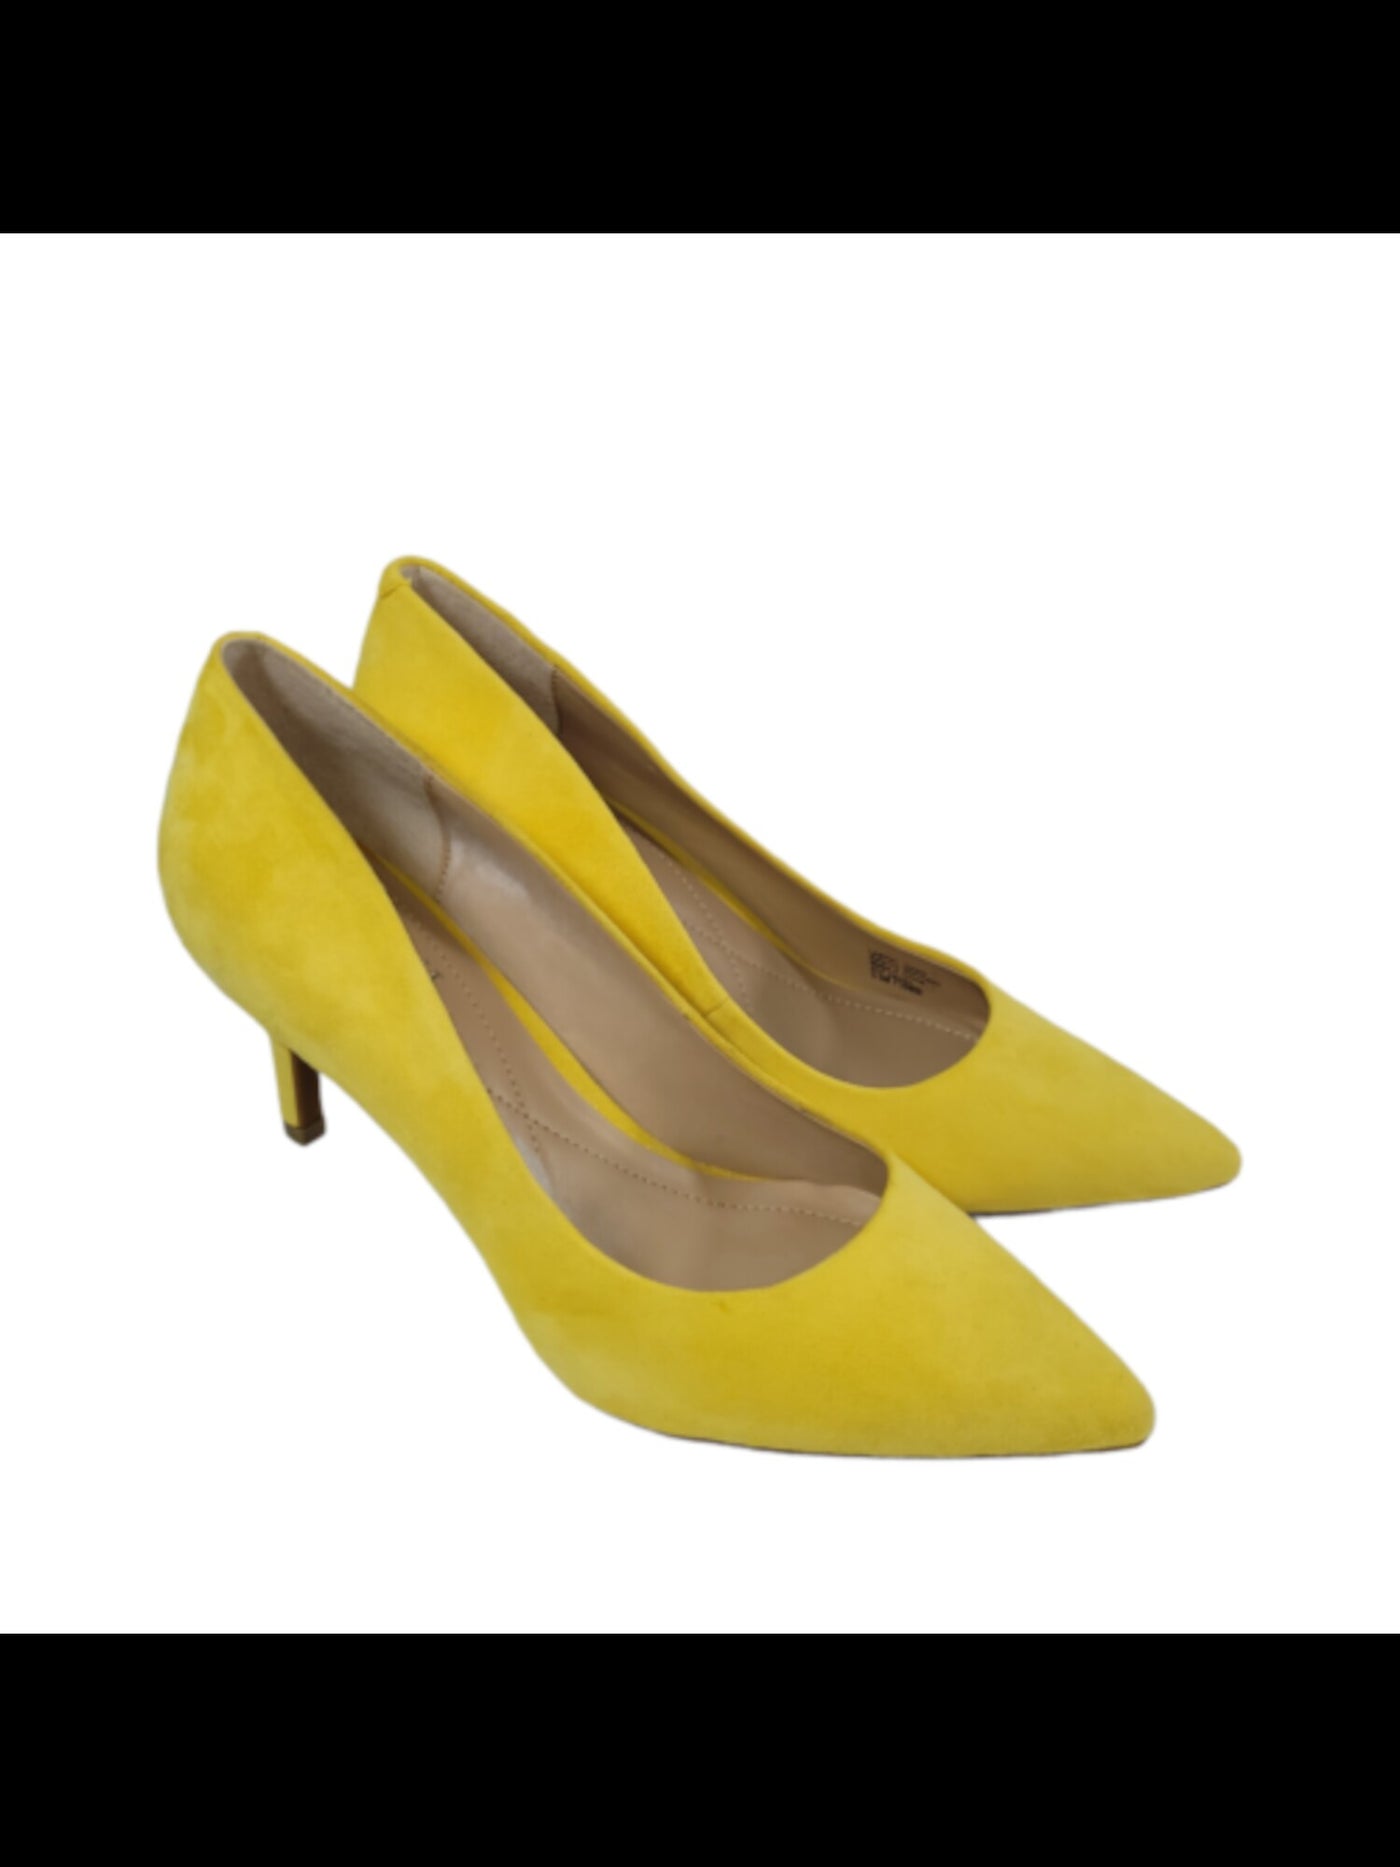 ALFANI Womens Yellow Comfort Padded Jeules Pointed Toe Stiletto Slip On Leather Pumps Shoes 6 M